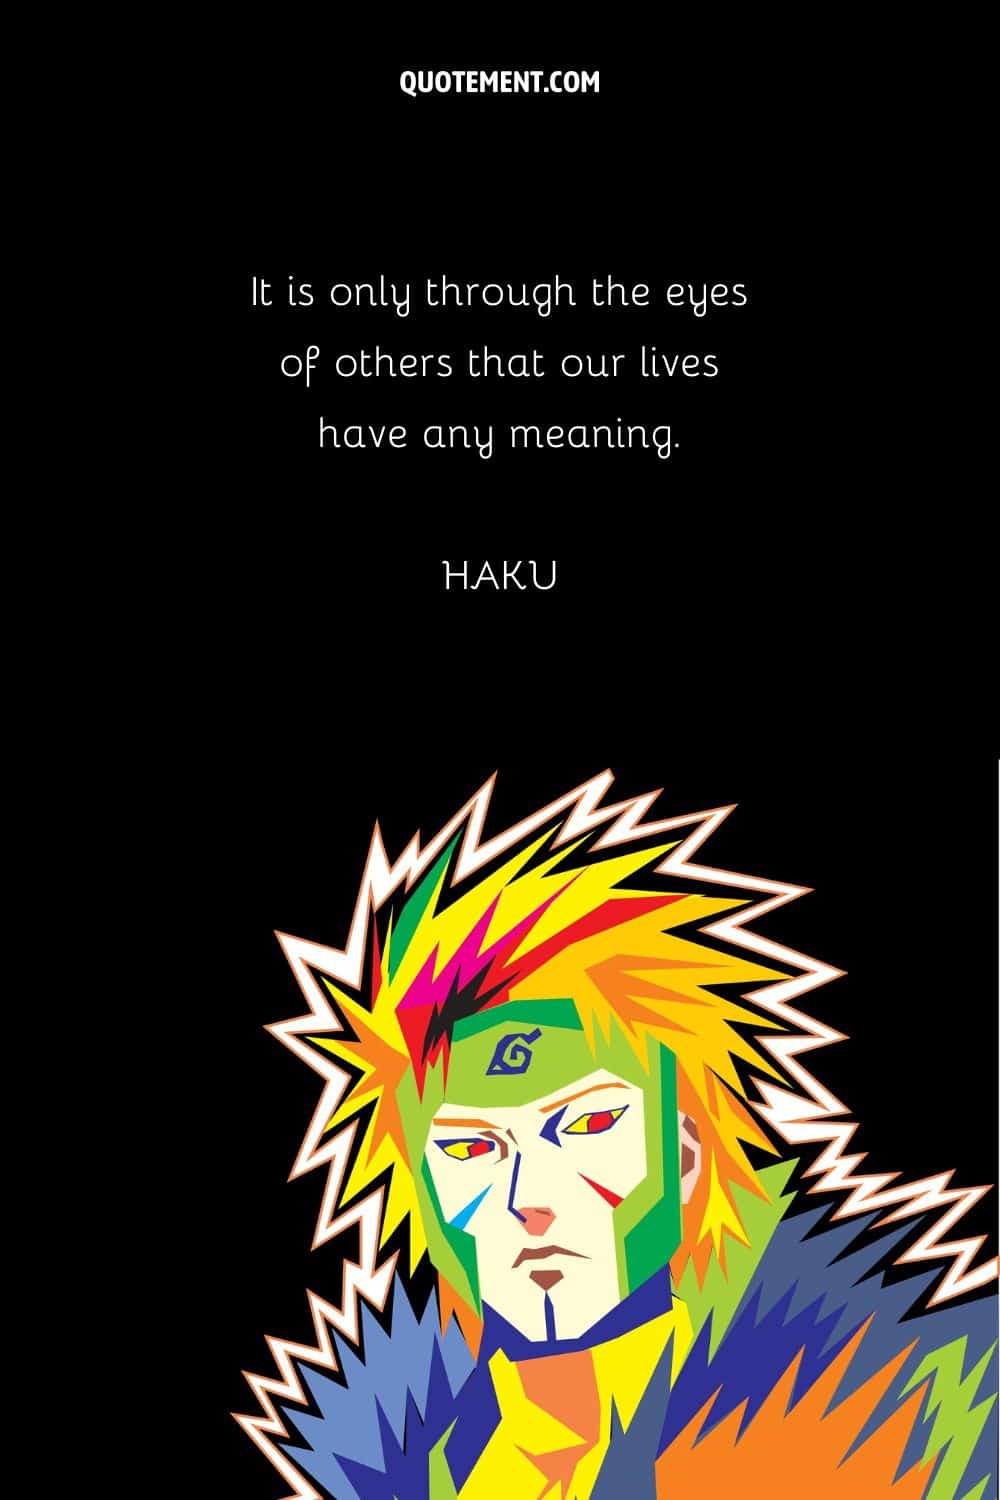 “It is only through the eyes of others that our lives have any meaning.” — Haku